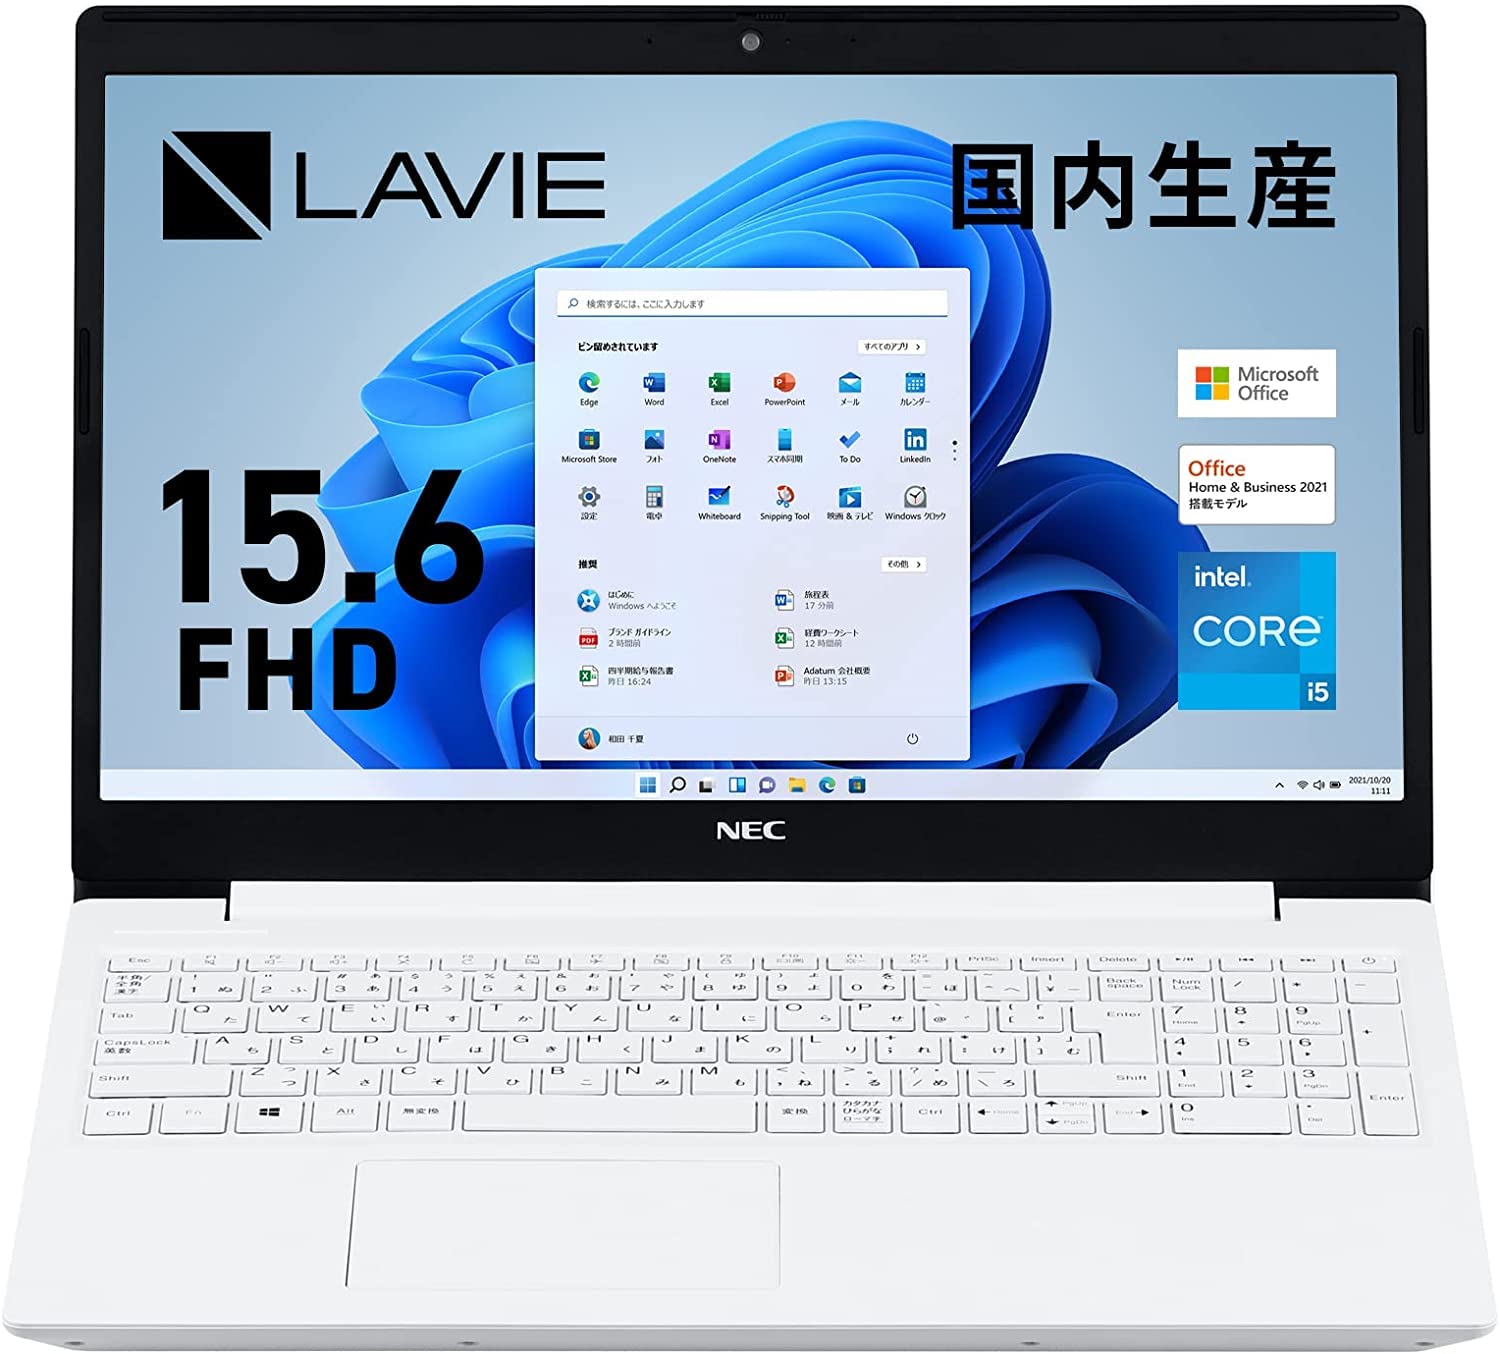 Buy NEC Laptop, LAVIE Direct N15(S) Equipped with Office 2021